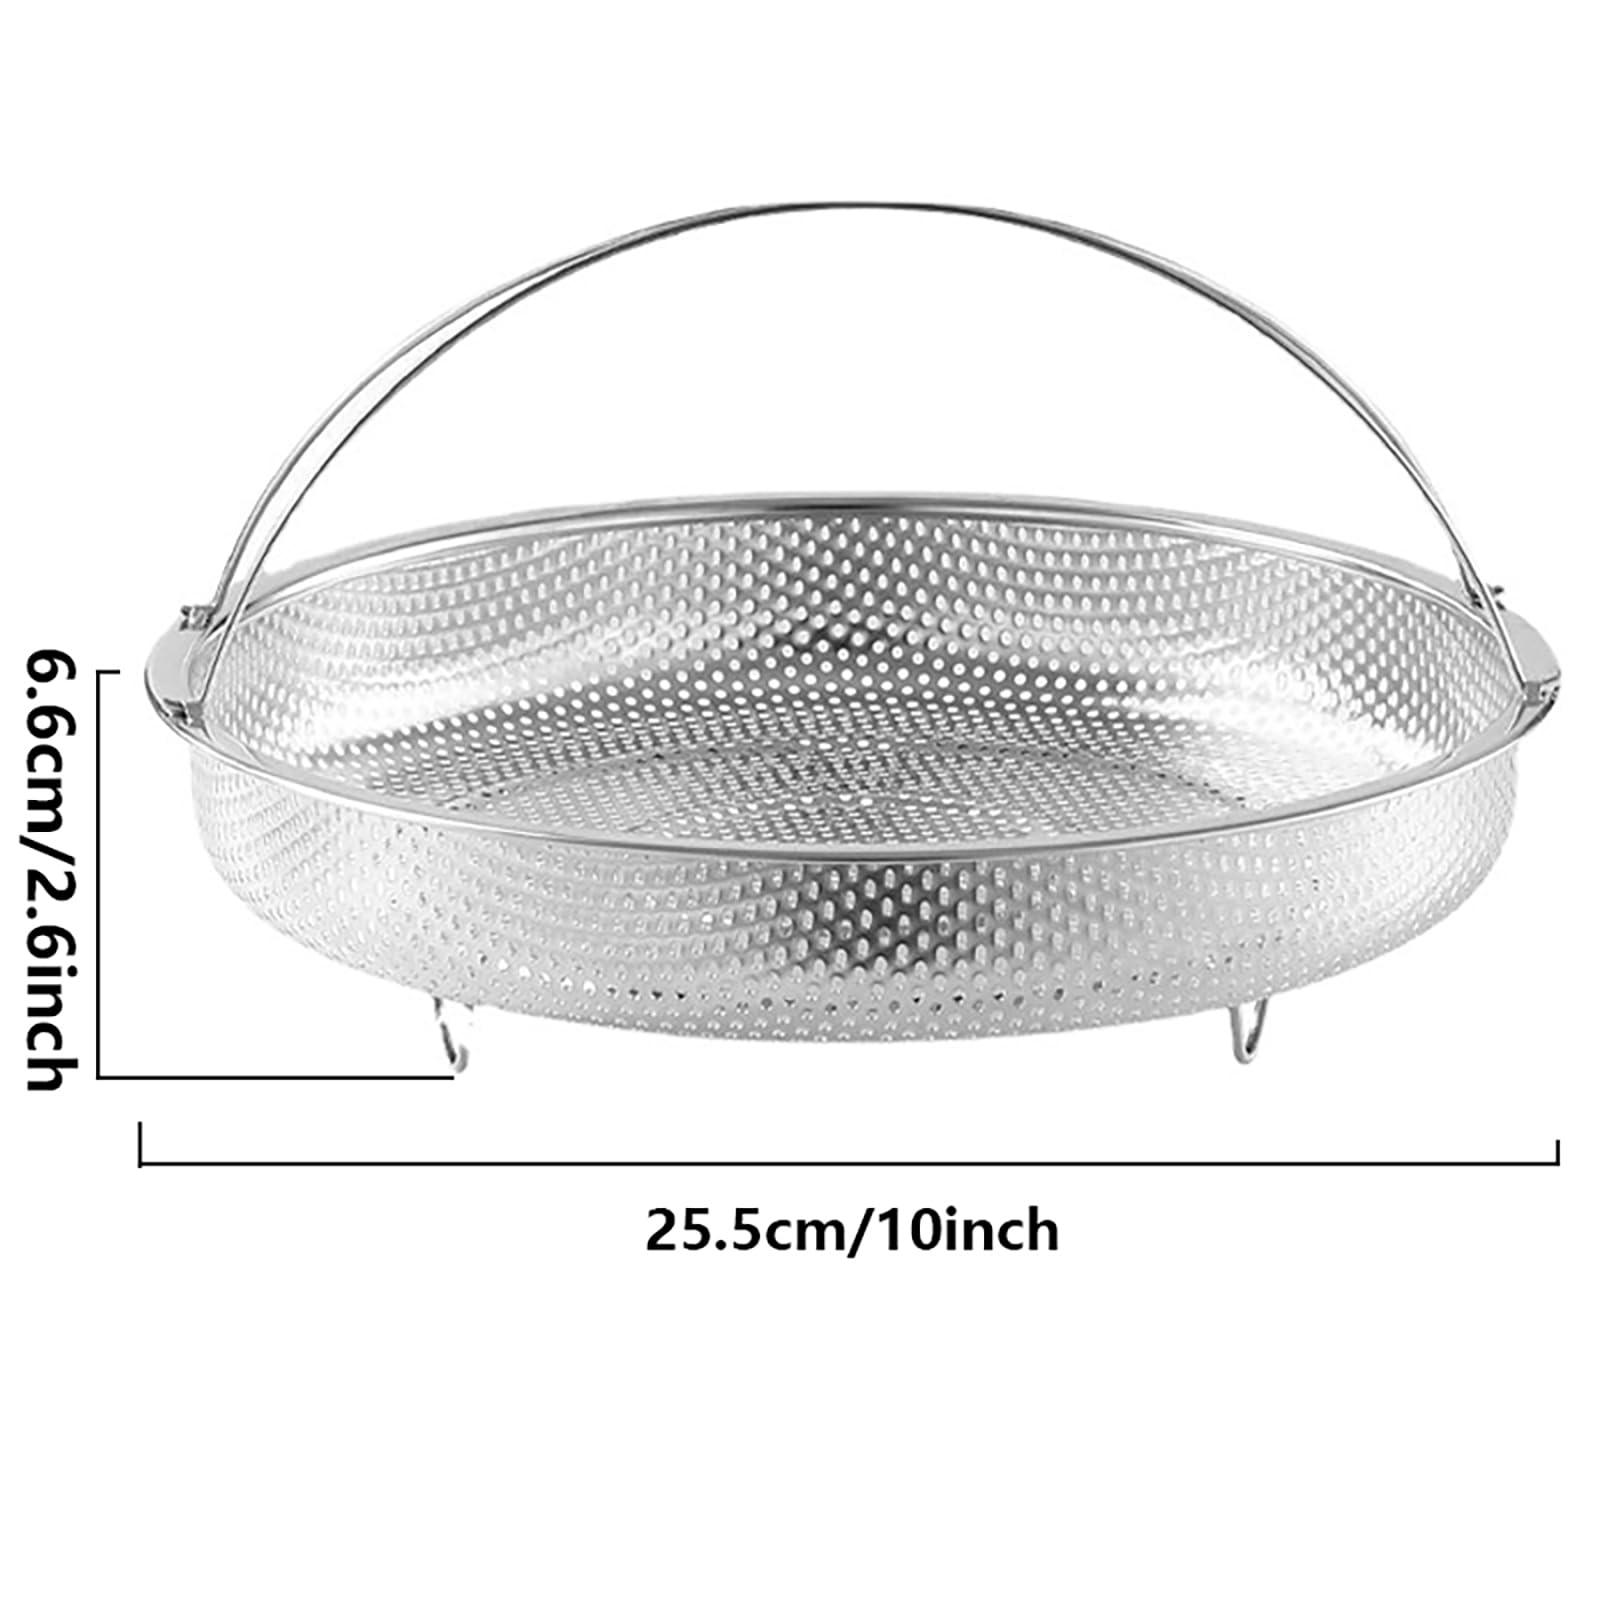 ZPUFAW Steamer Basket for Steaming Vegetable Dumplings, Multiple Use as Rice Pasta Fruit Washer, Stainless Steel Food Steamer Basket with Handle and Base Leg - CookCave